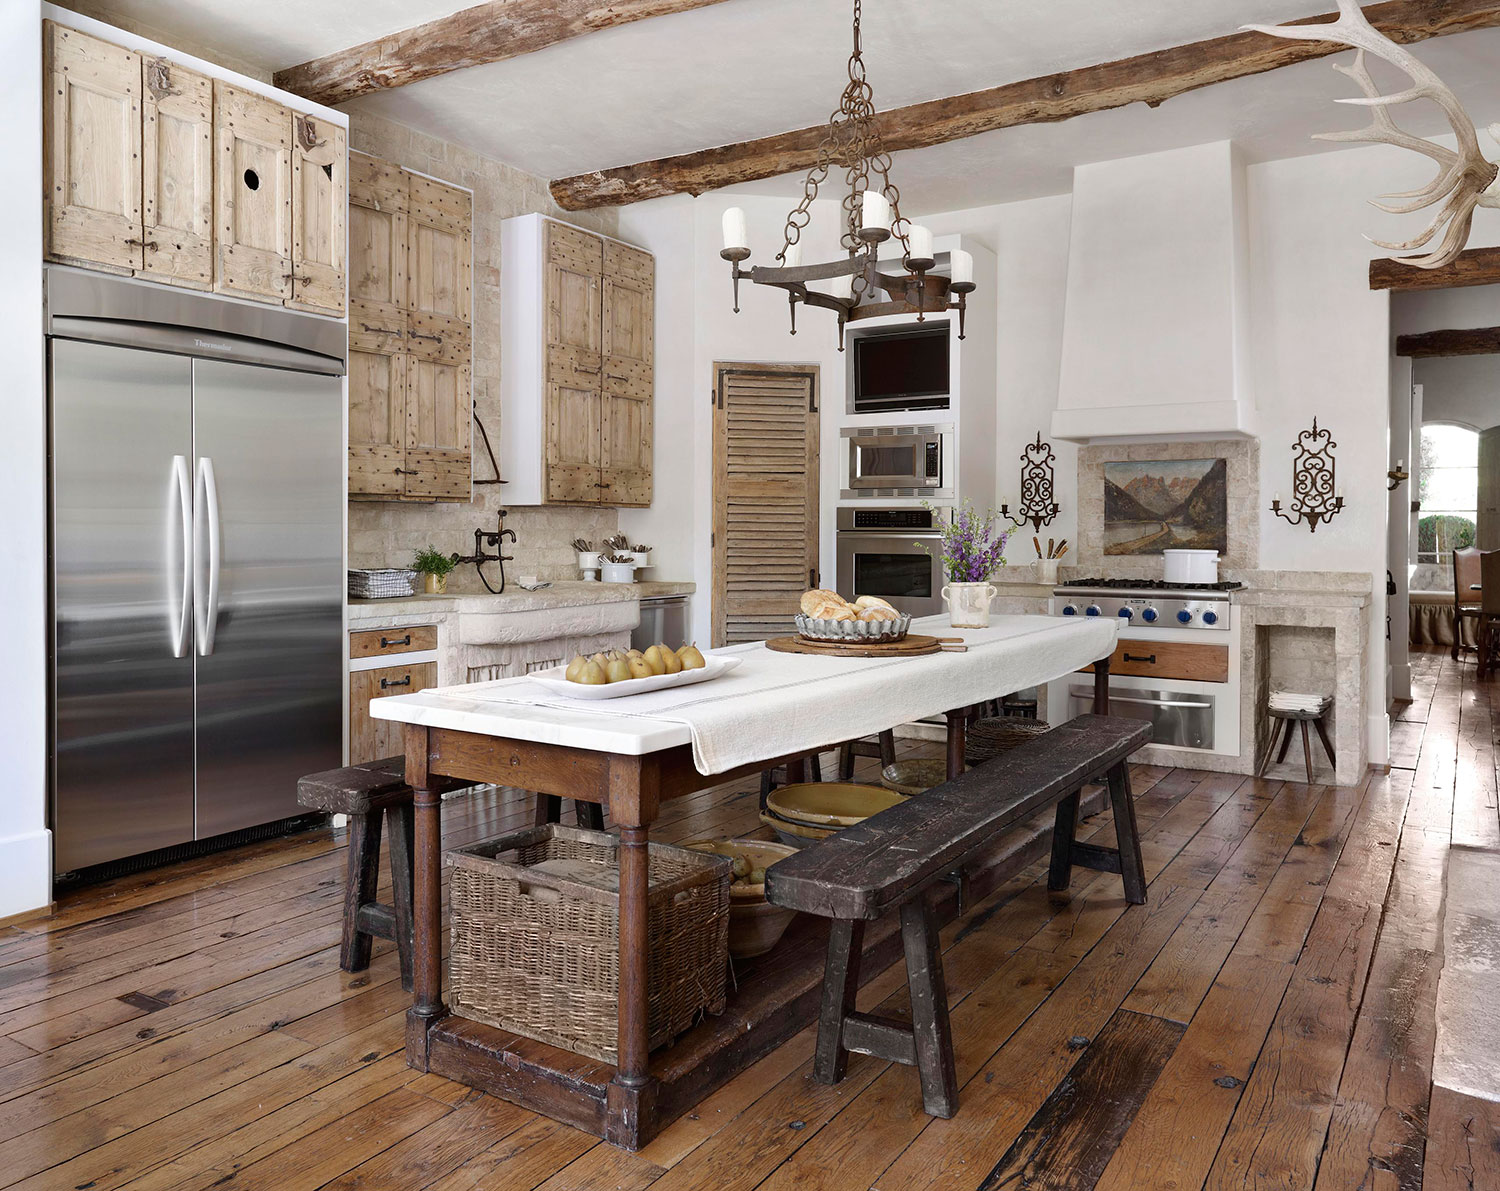 French Kitchen Design Ideas For A Lovely French Country Style ...